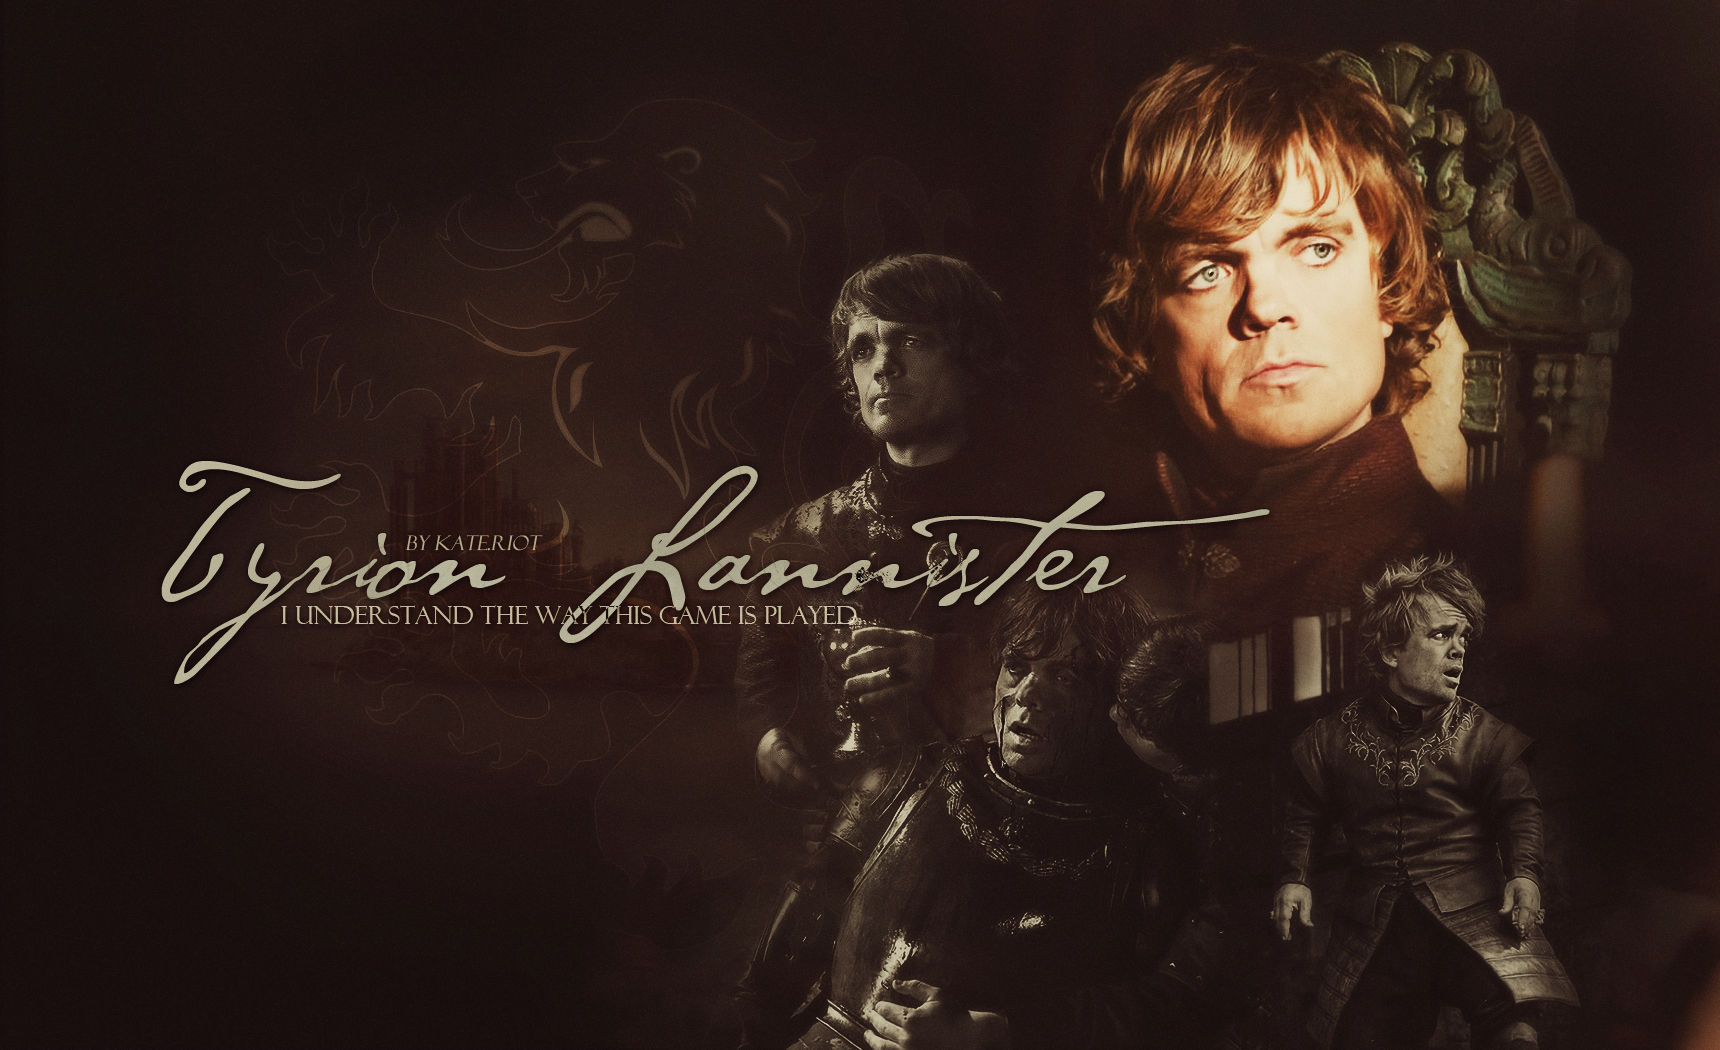 Game of Thrones images Tyrion Lannister wallpaper photos 36188150